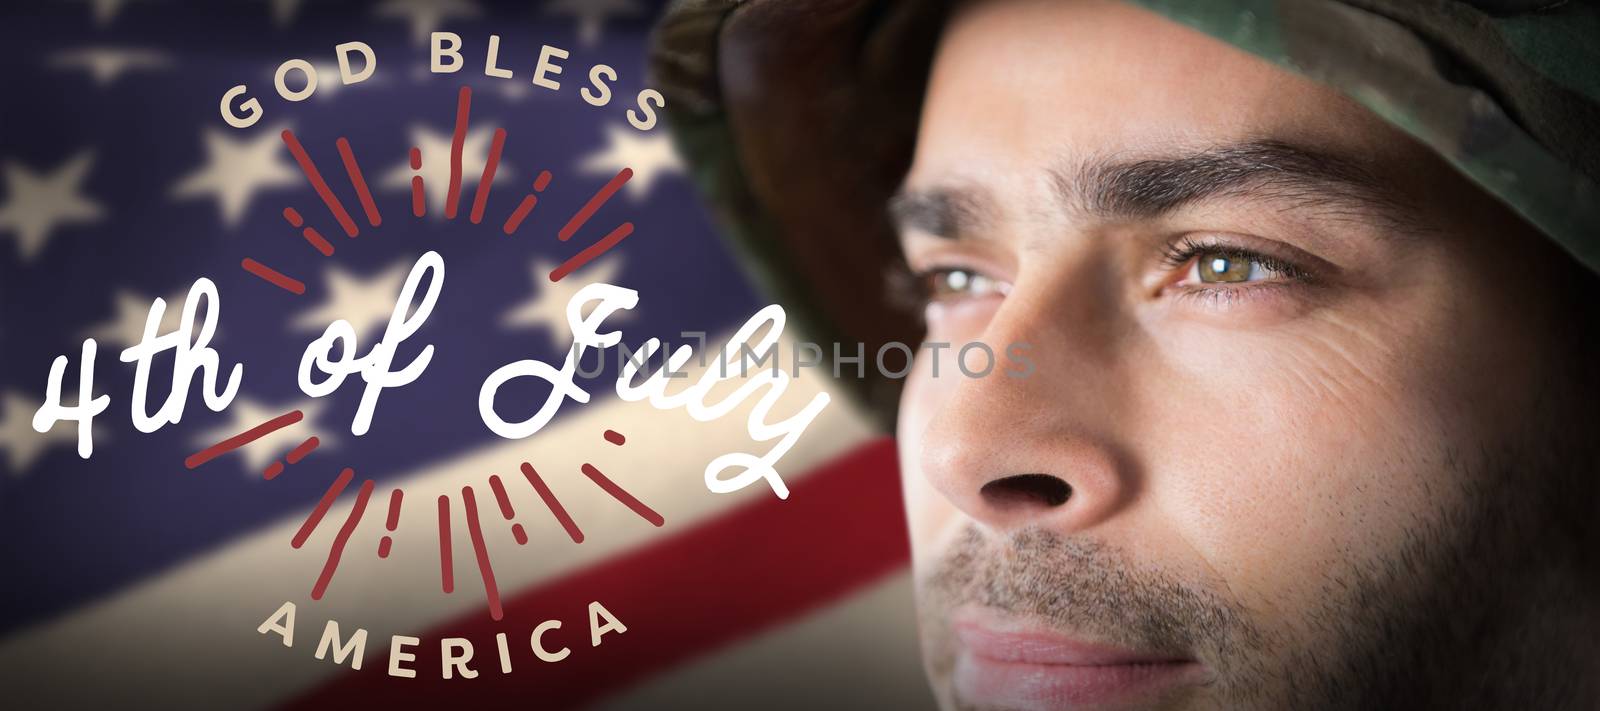 Close up of thoughtful soldier against digitally generated image of happy 4th of july message